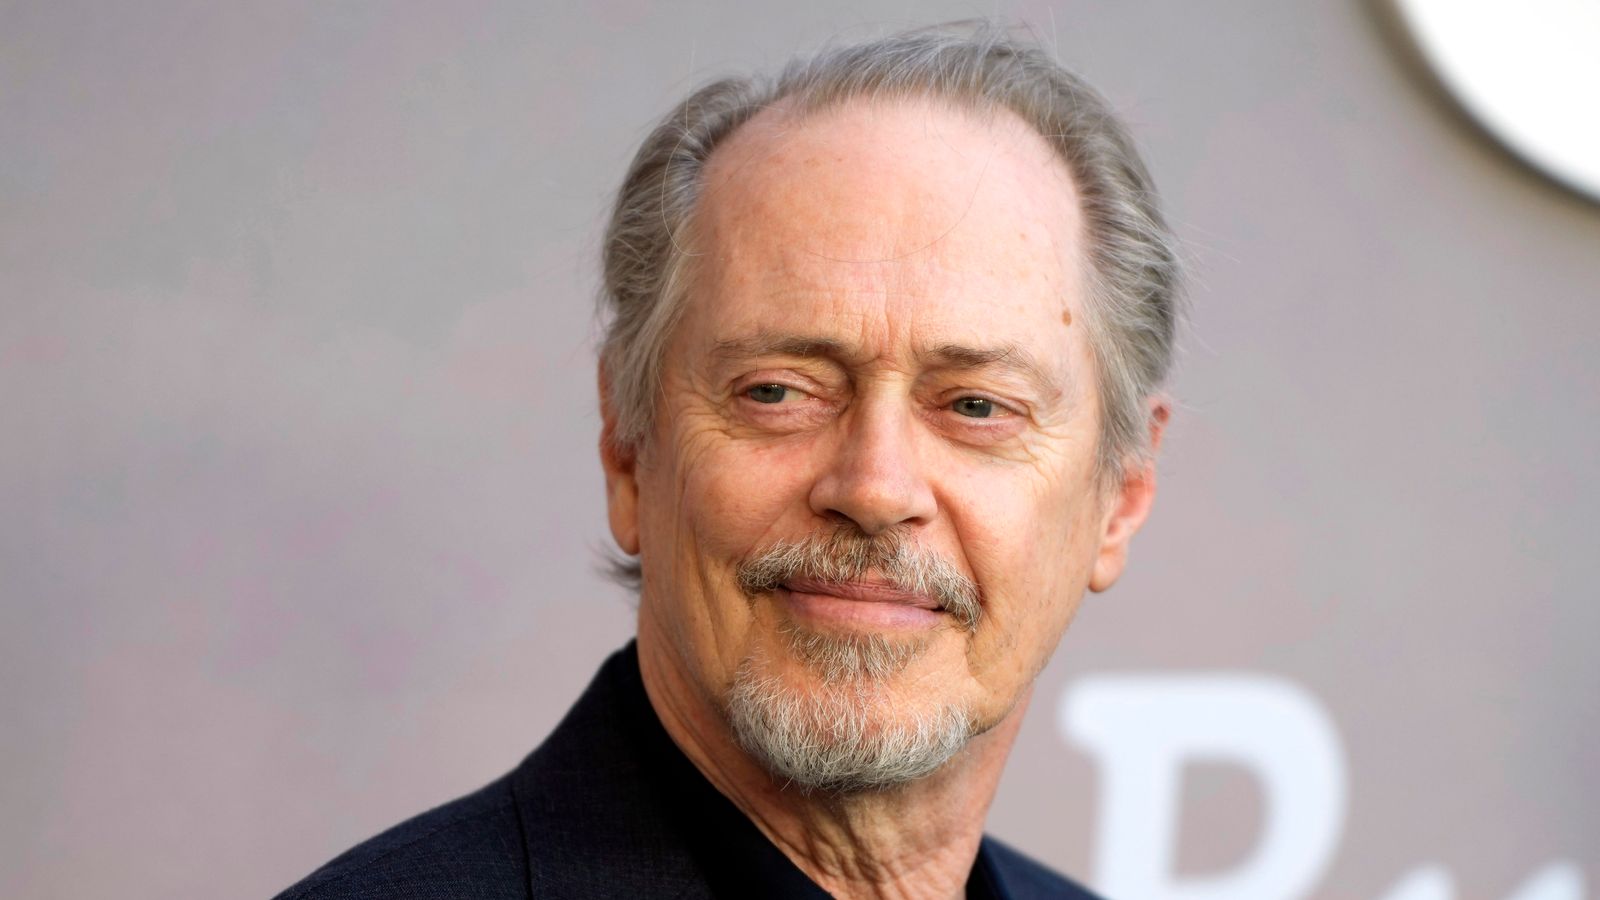 Steve Buscemi: Homeless man charged over random assault on Hollywood actor in New York City street